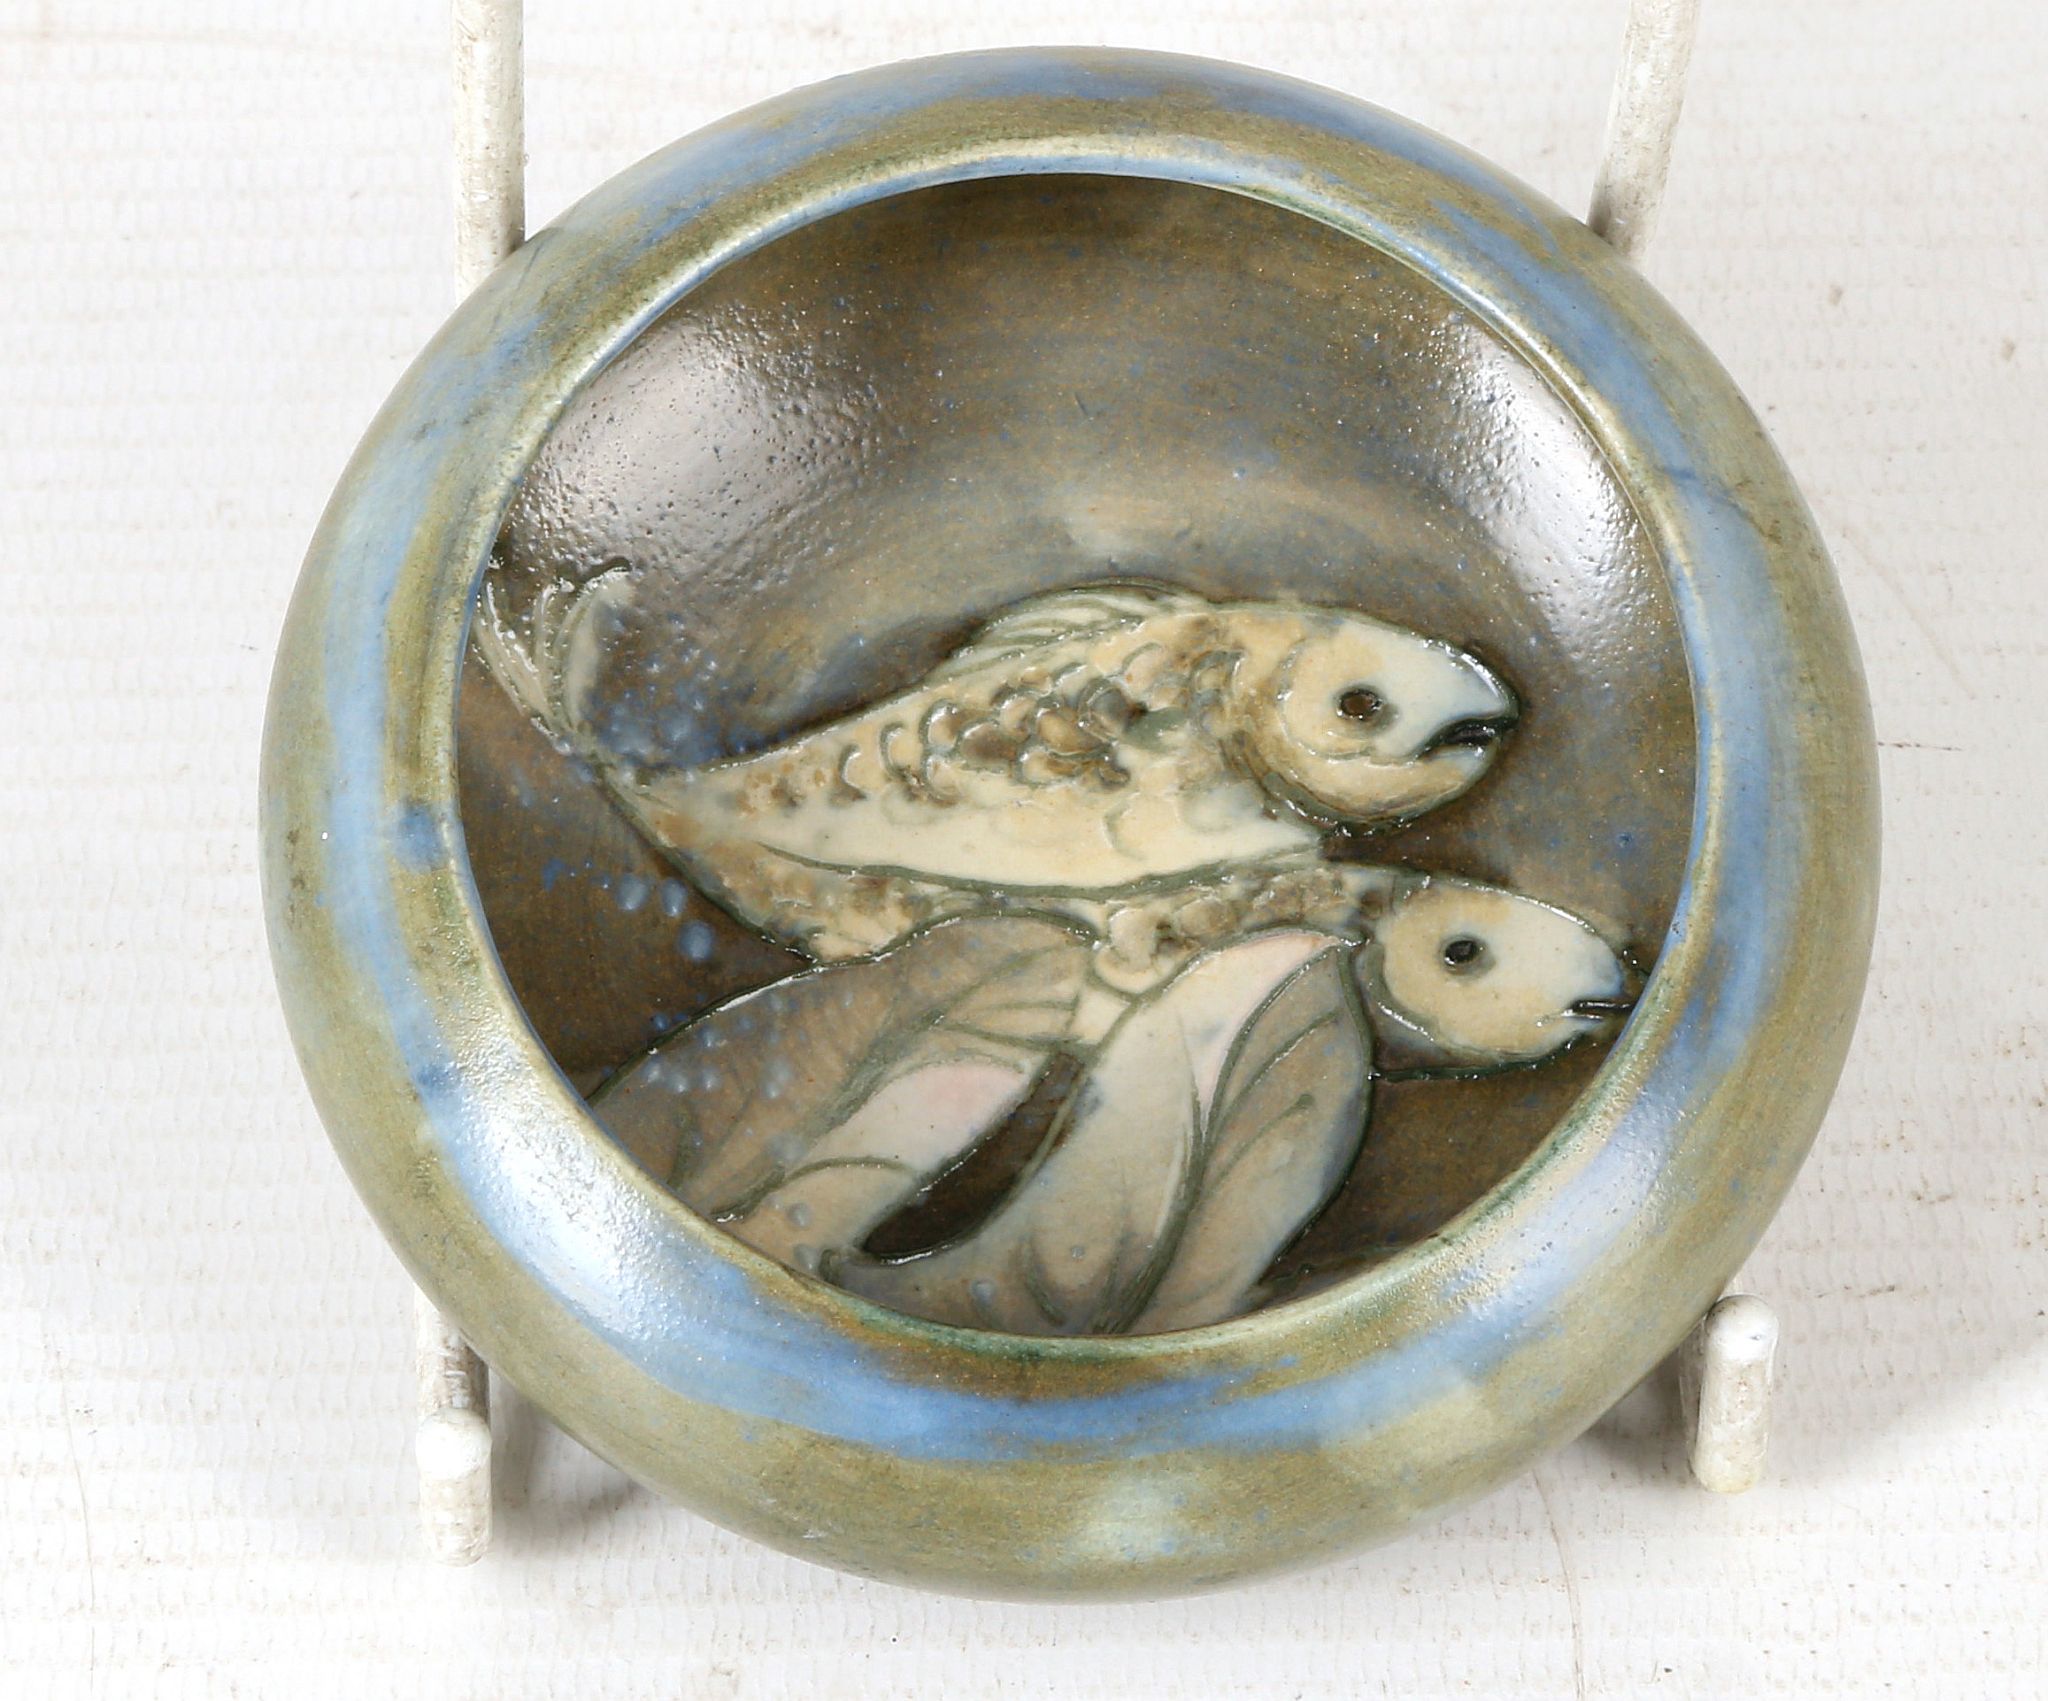 A WILLIAM MOORCROFT POTTERY MINIATURE BOWL, tube-lined with fish and leaves in beige and blue, c.